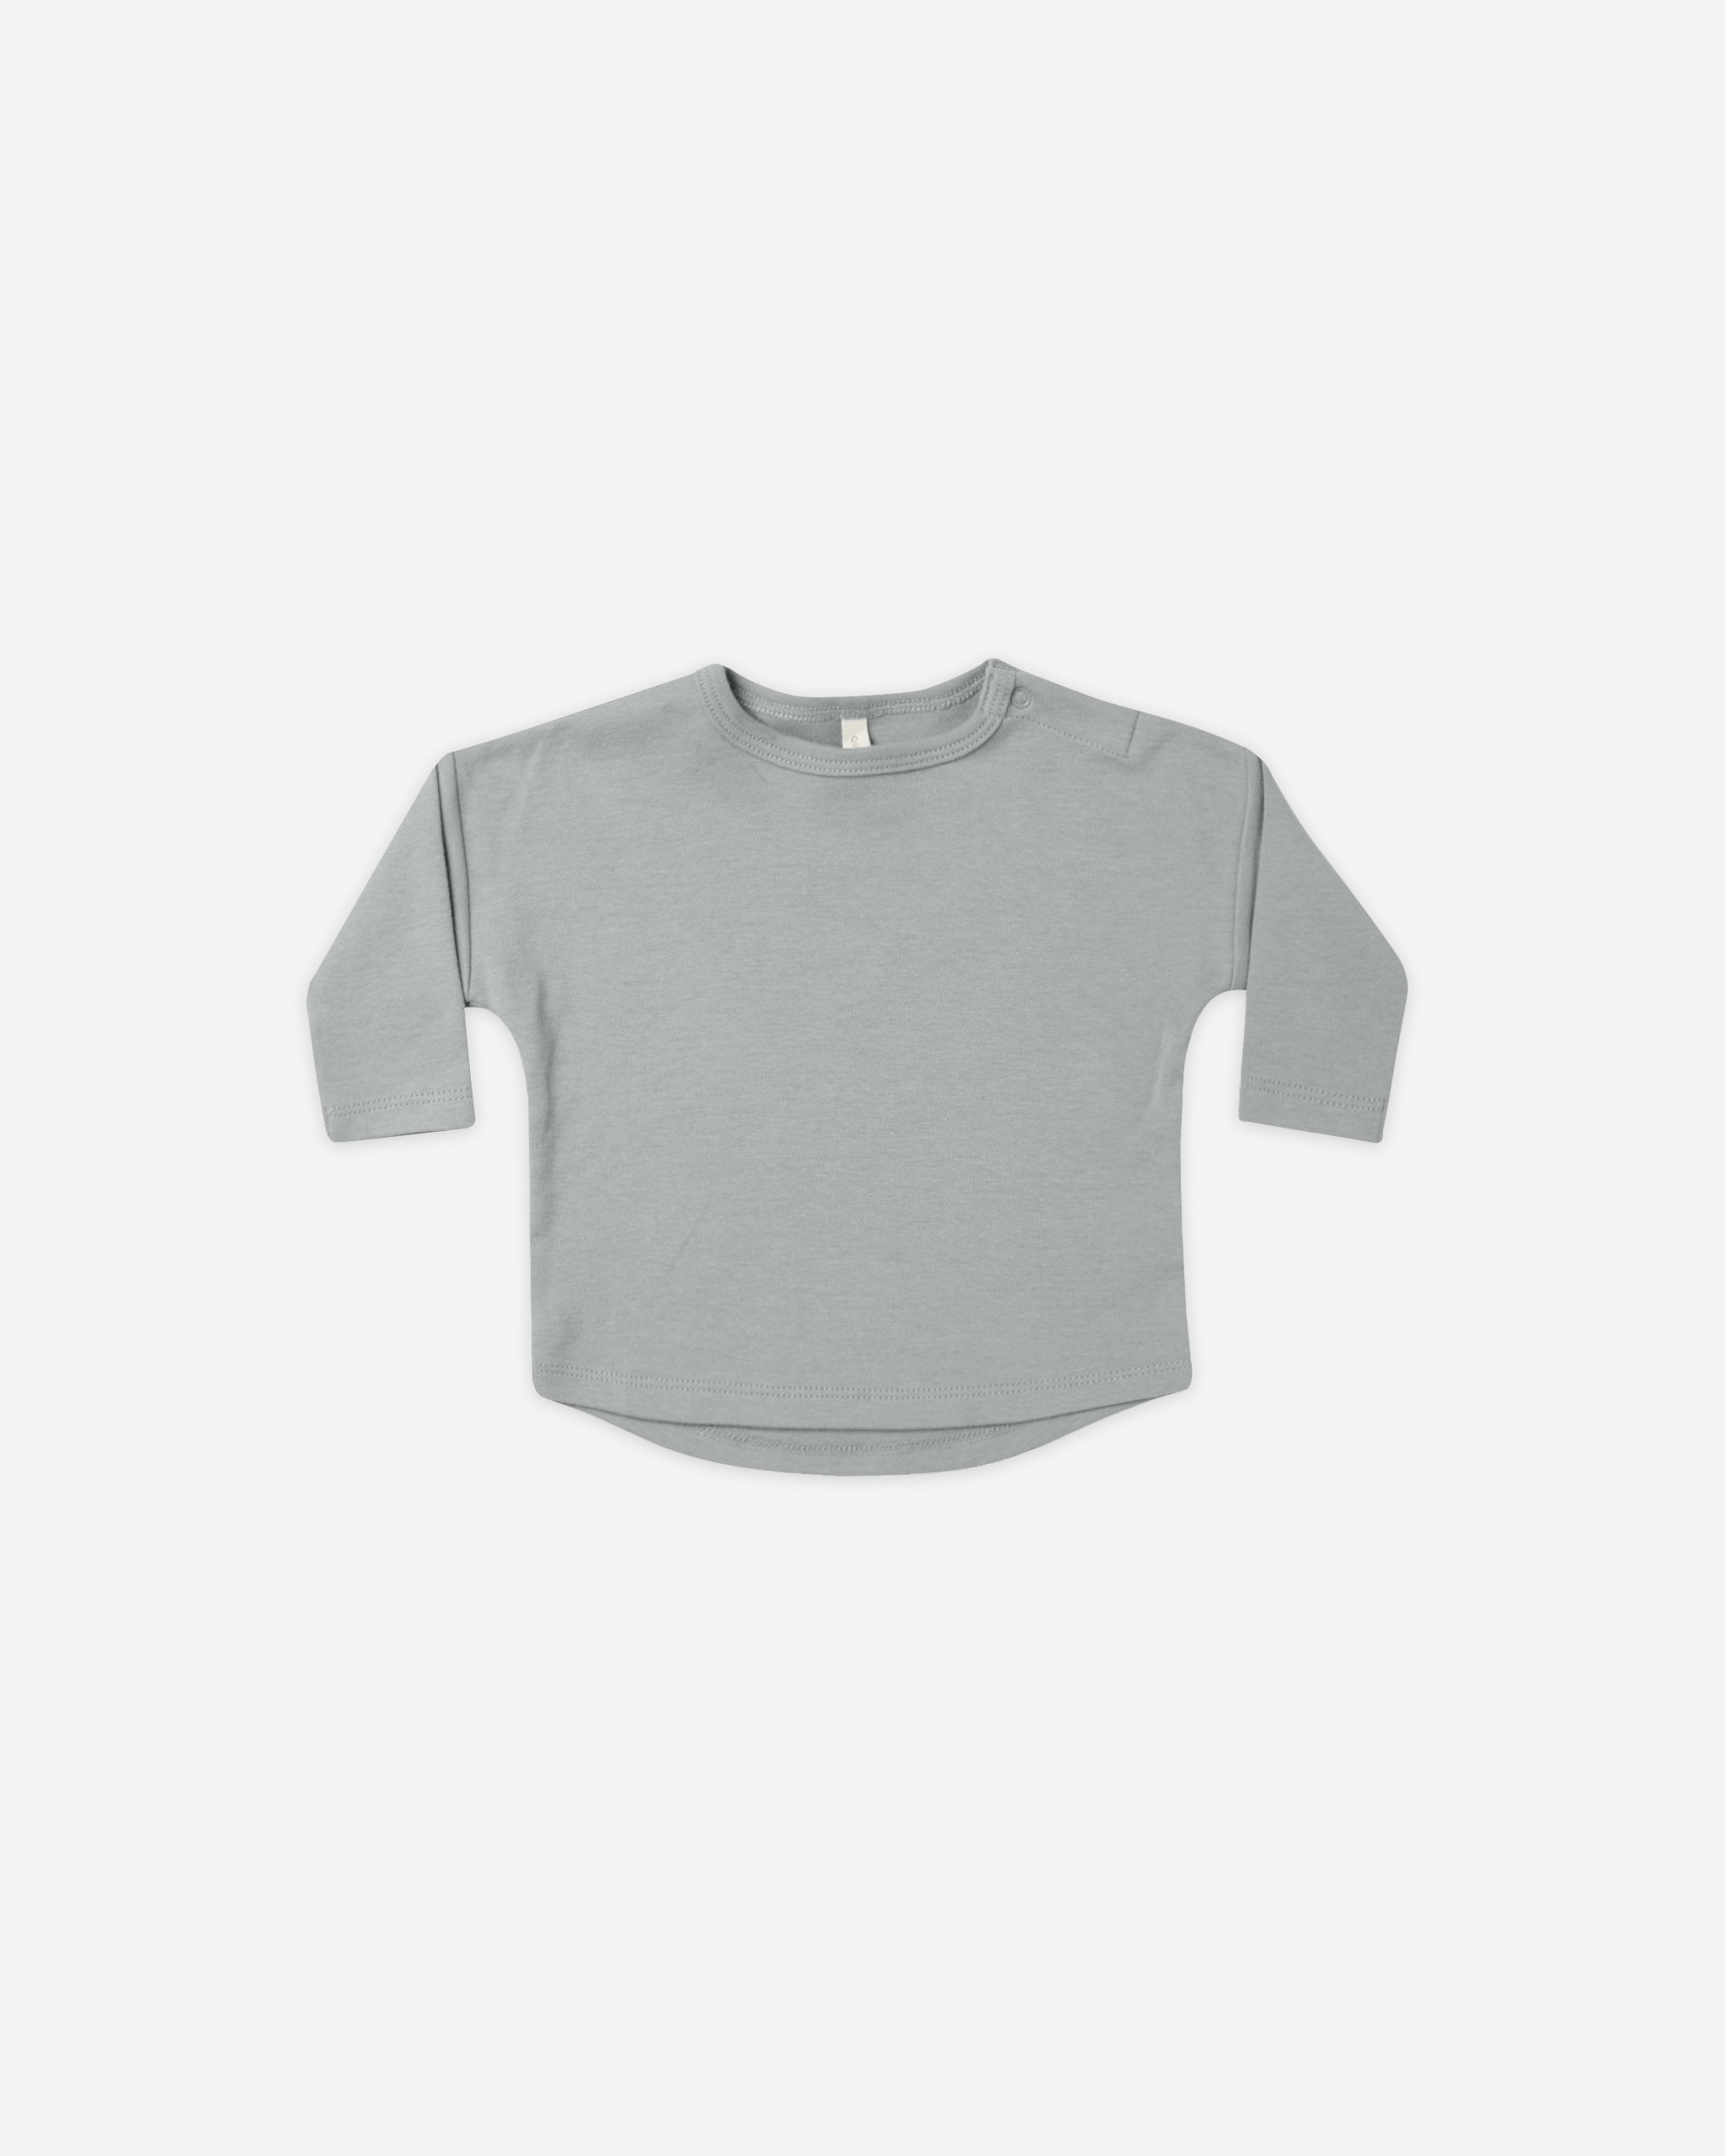 Long Sleeve Tee || Dusty Blue - Rylee + Cru | Kids Clothes | Trendy Baby Clothes | Modern Infant Outfits |